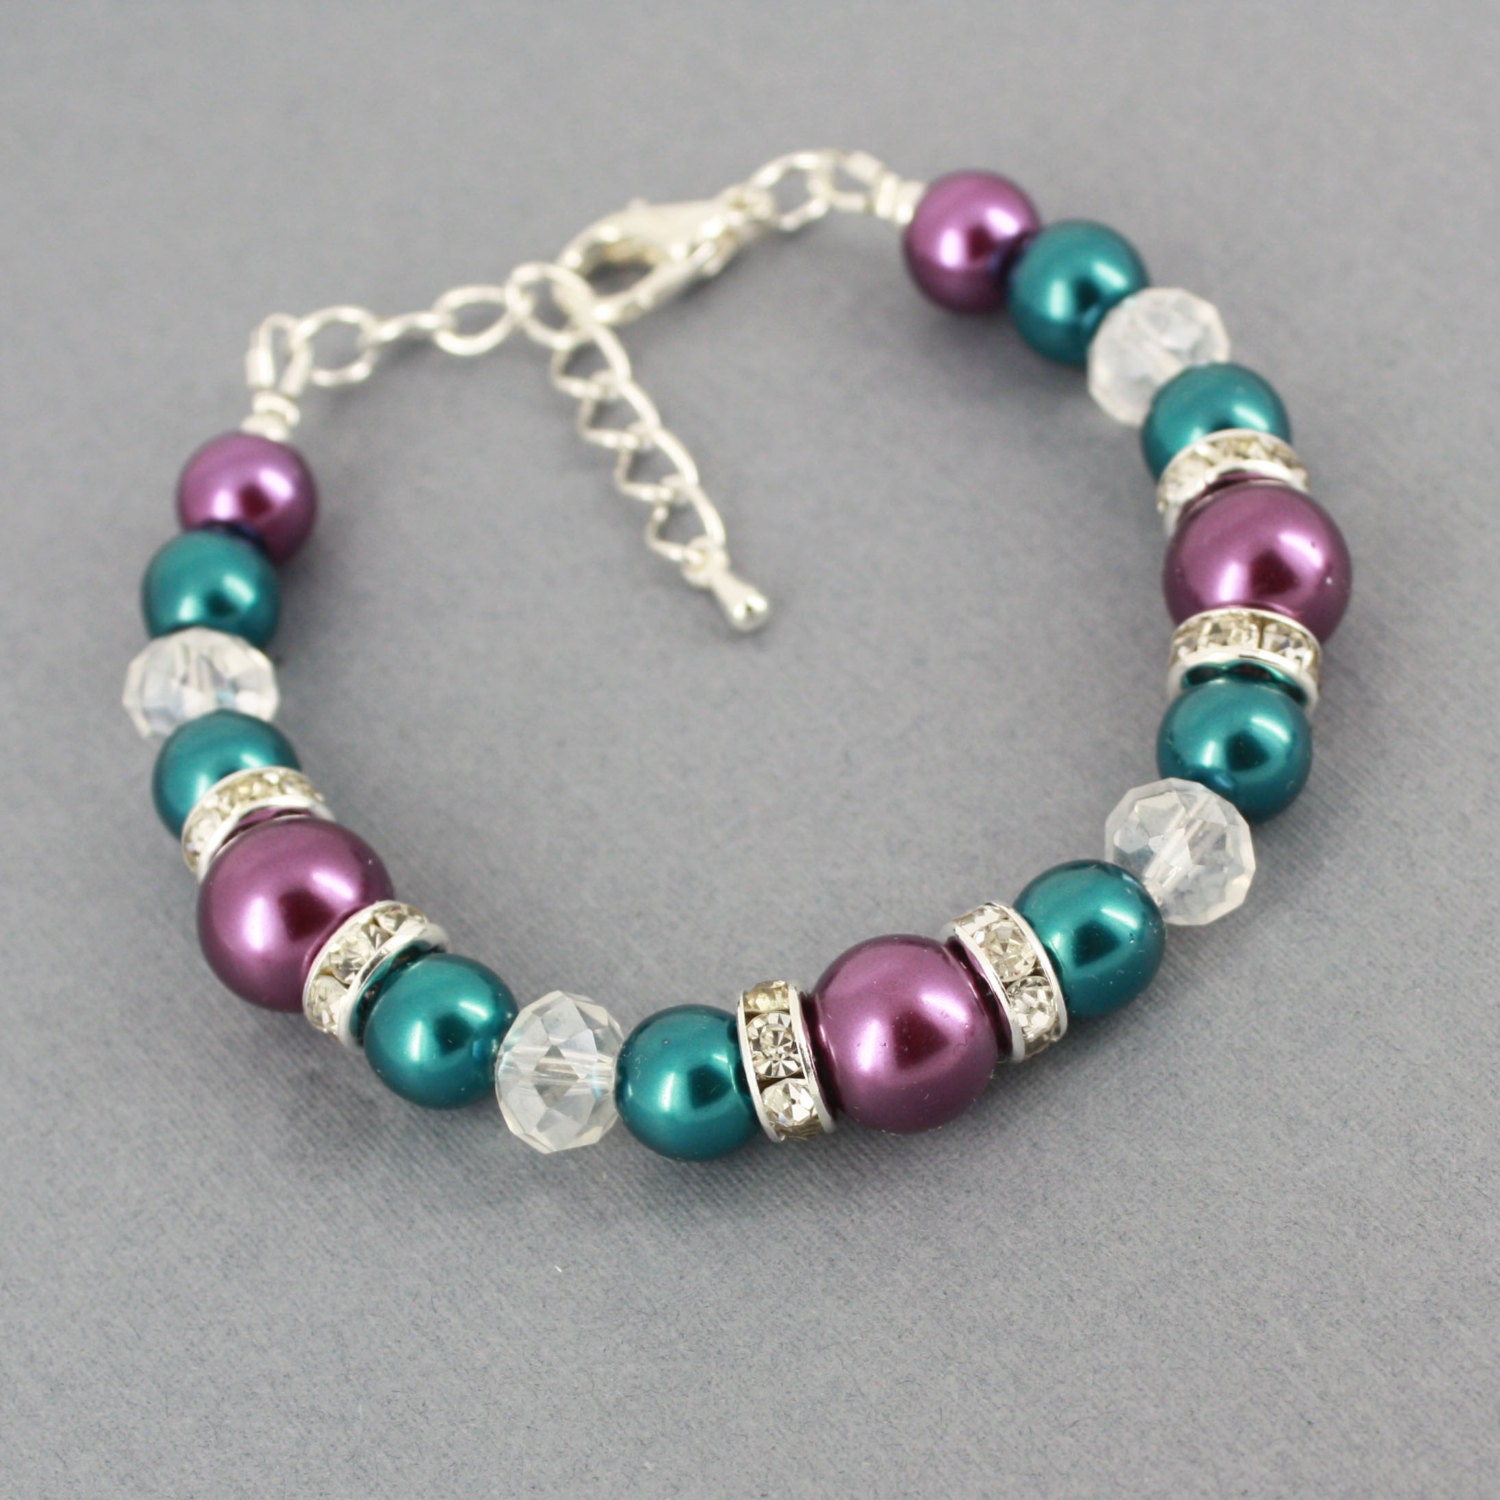 Teal and Purple Bracelet Teal Bracelet by DaisyBeadzJoaillerie